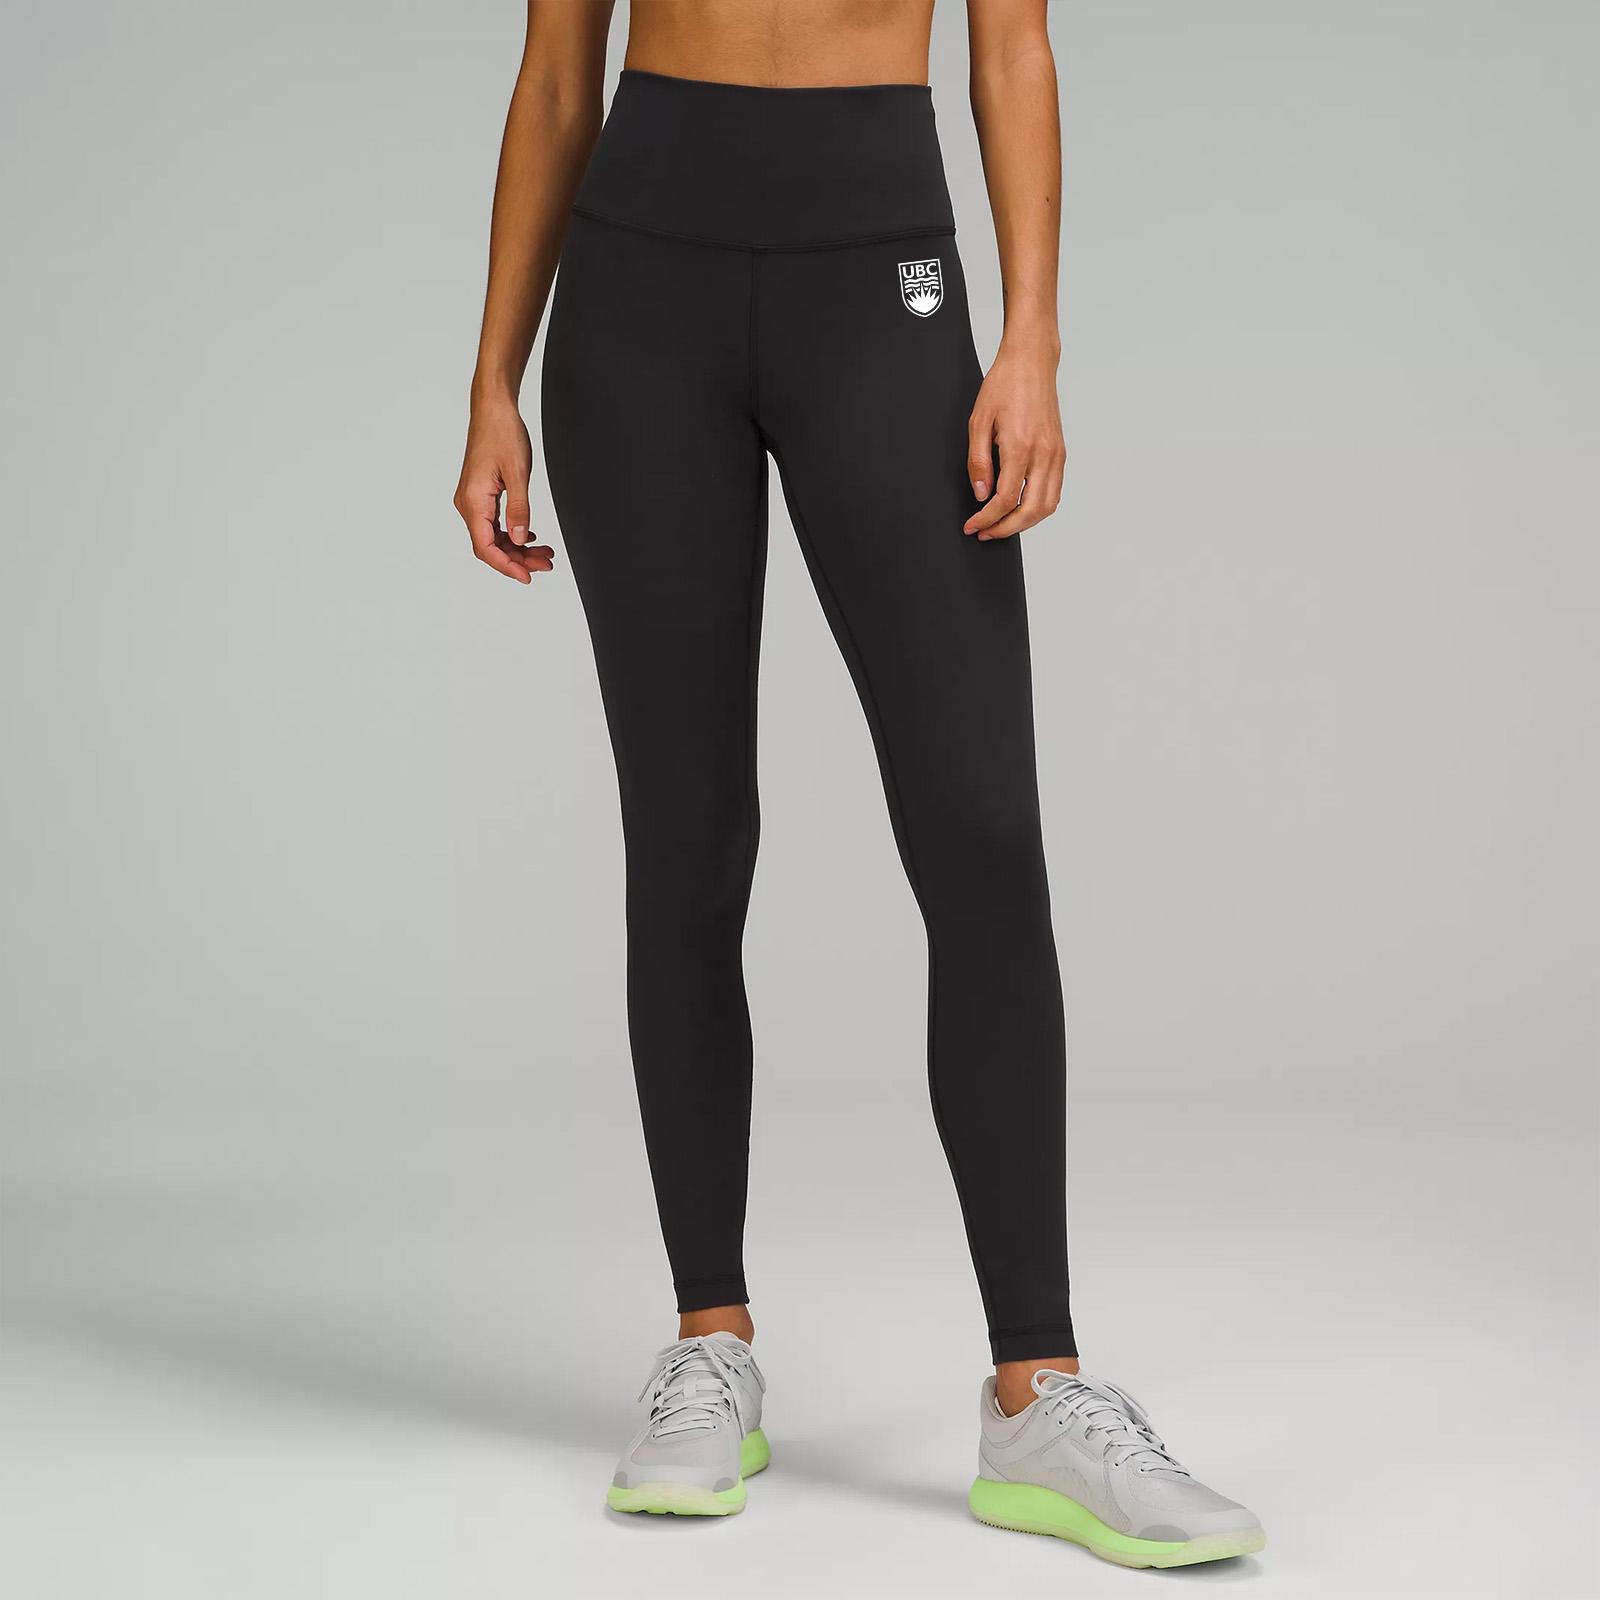 Under Armour Women's Fall Hi-Rise Tight